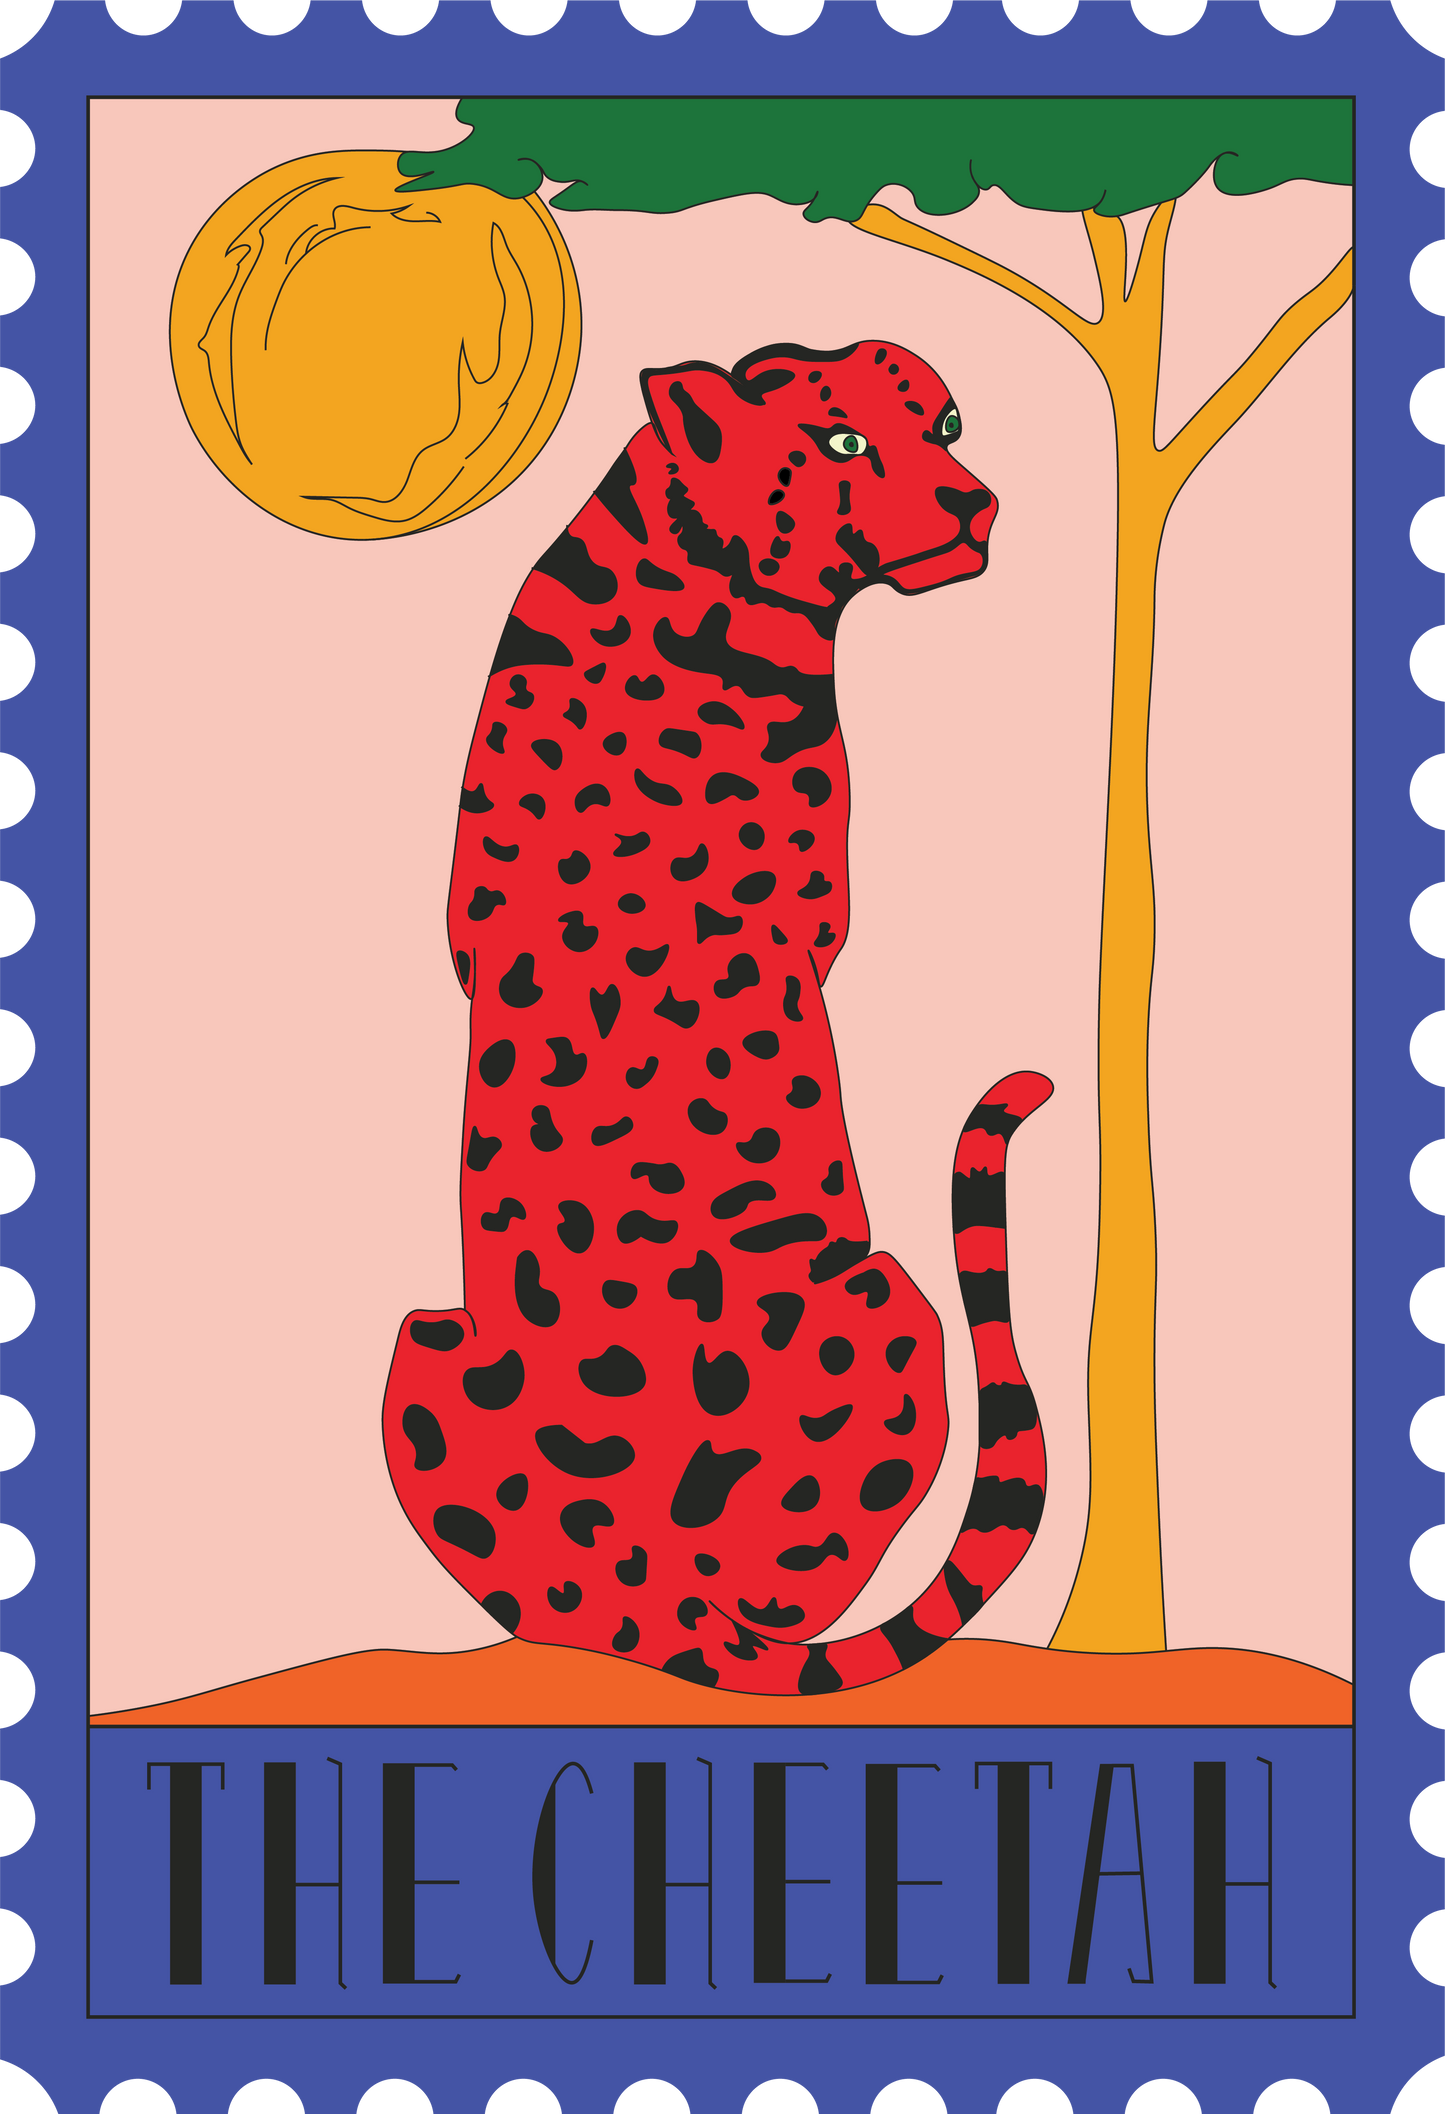 PERSONALIZATION THE CHEETAH STAMP